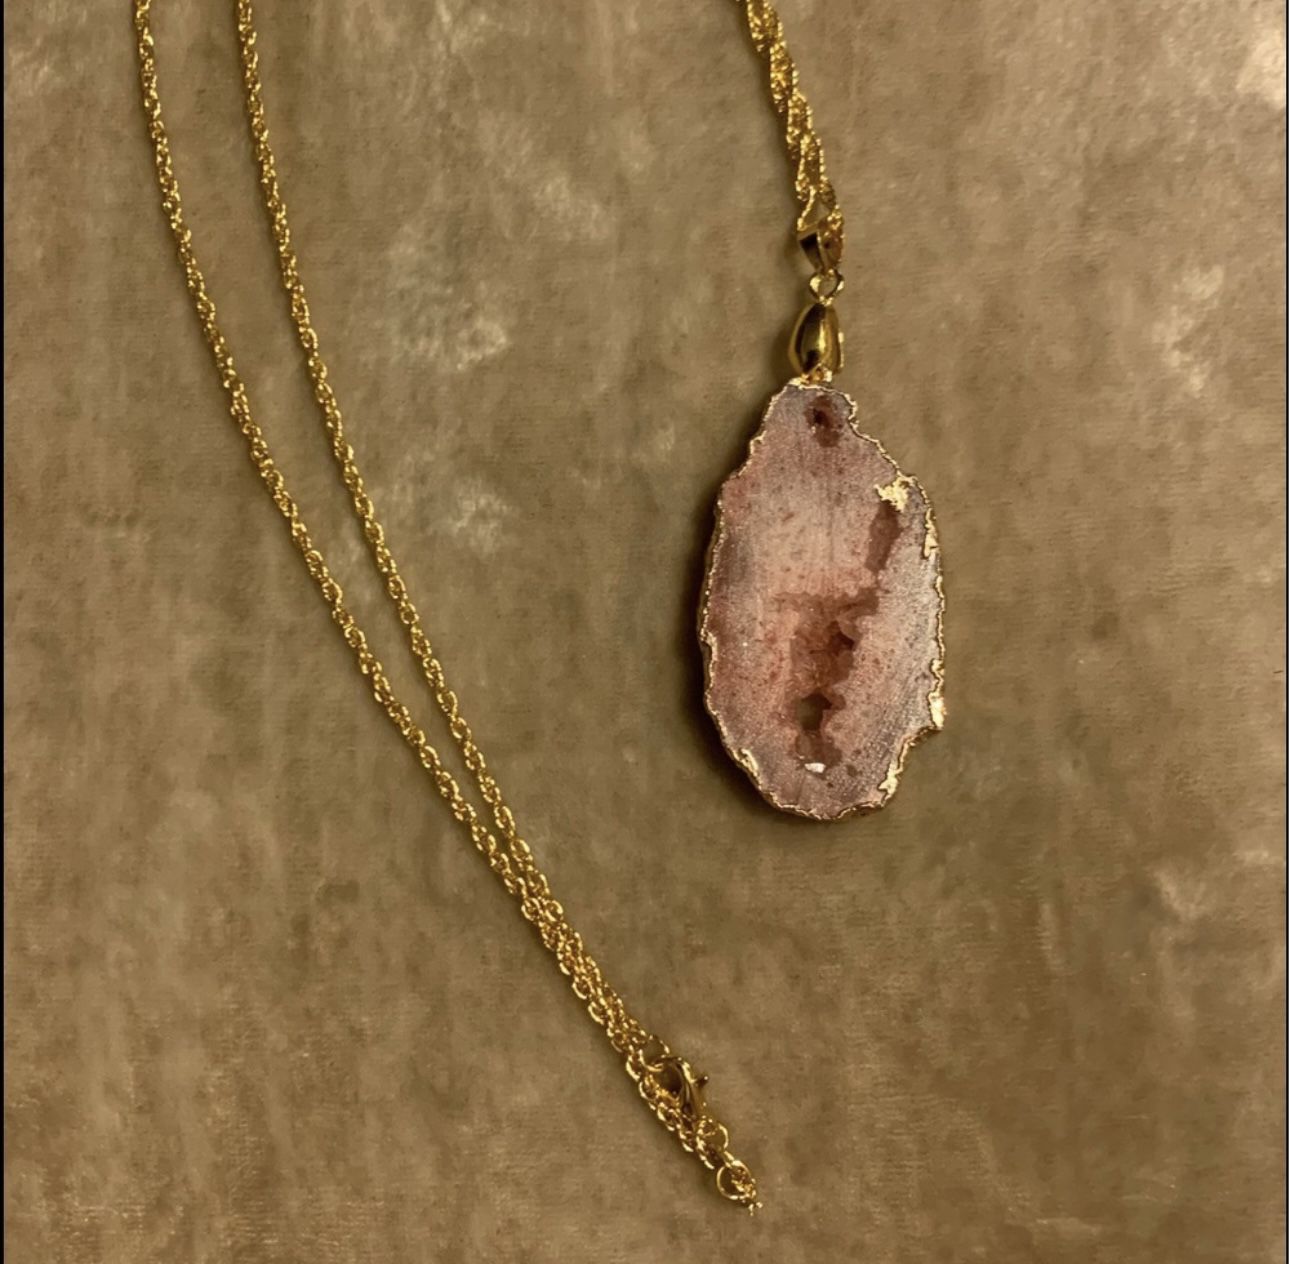 Orange Crystal Agate Druzy Quartz Pendant With A Gold Plated Chain Necklace 